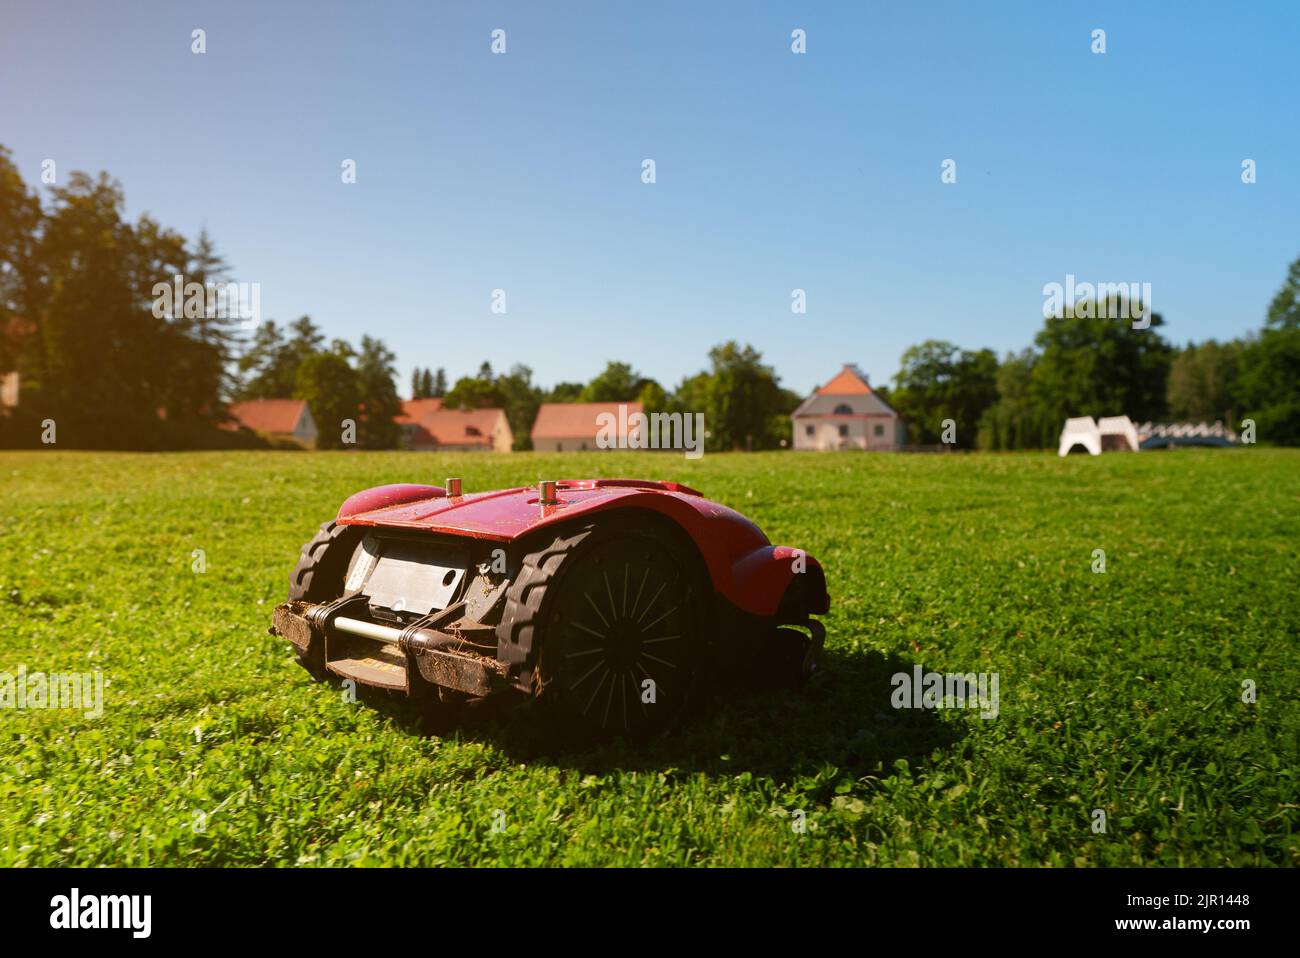 Red robotic lawn mower mows the grass on the lawn. Stock Photo